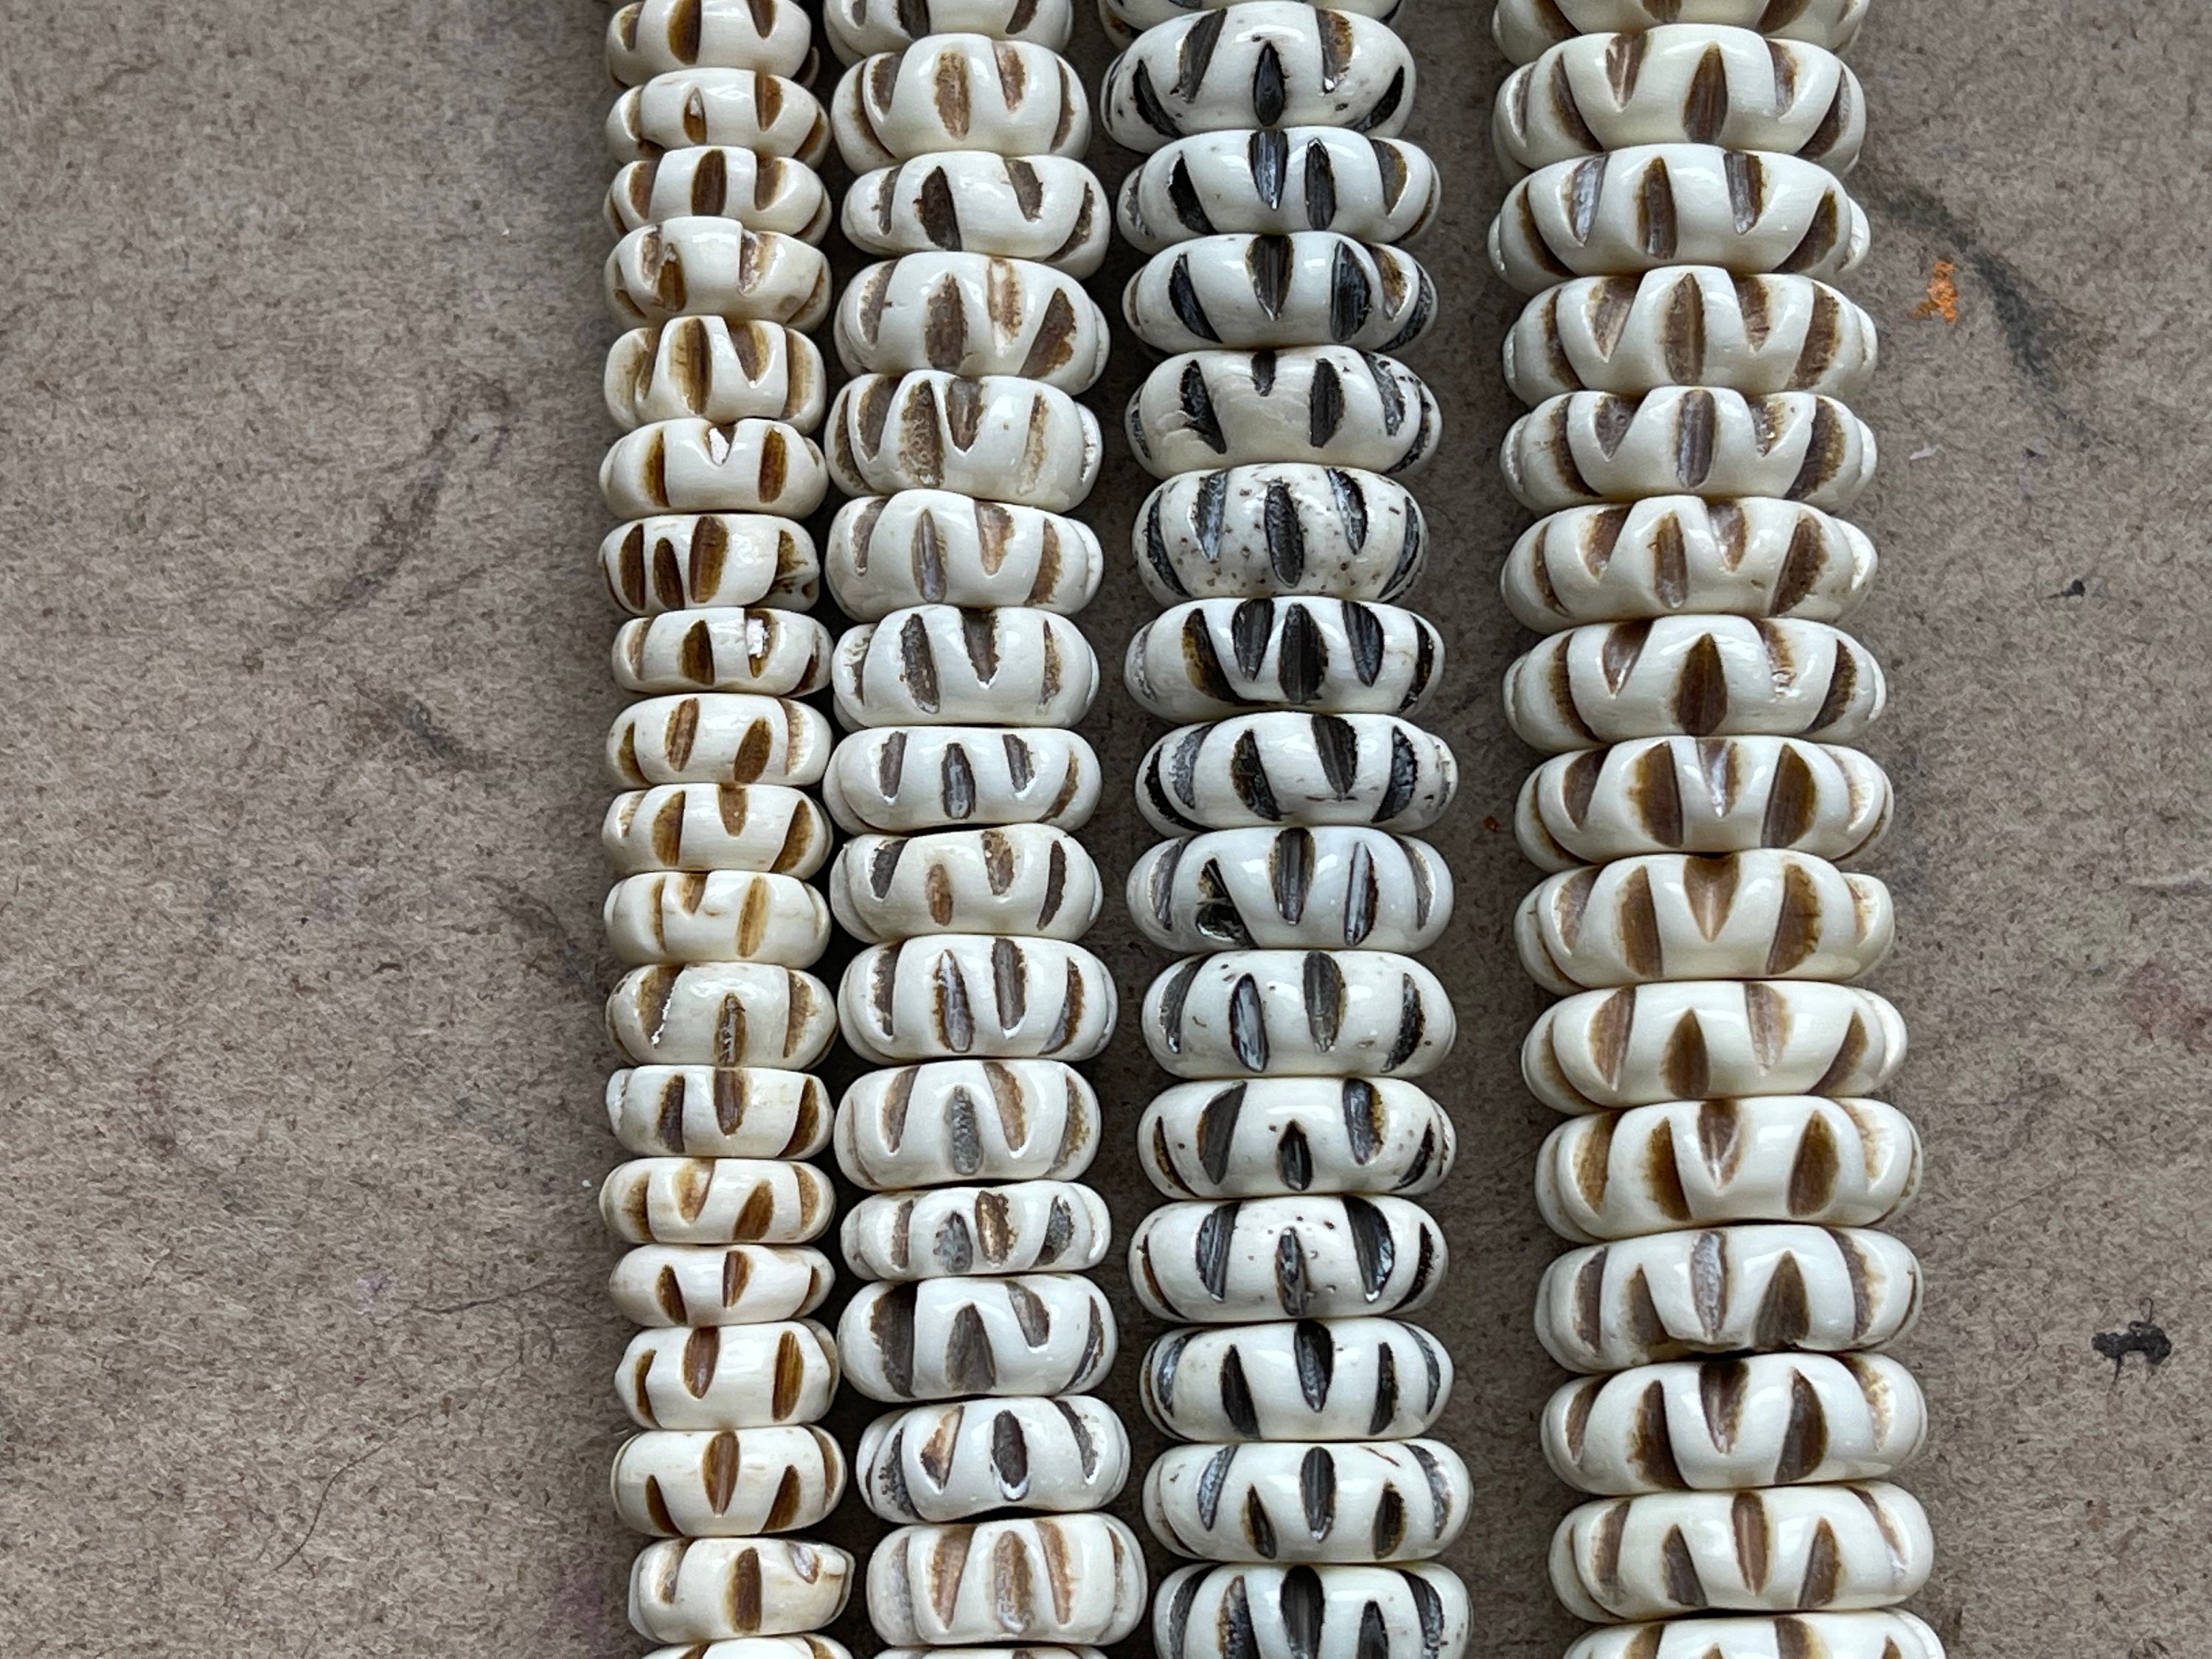 Cream Orbit Rondelle Bone Beads : Cream, Silver & Black Painted, 8x7mm,  Natural Craft, Jewelry Making Supplies, Beads for Mala's, 28 Pcs 